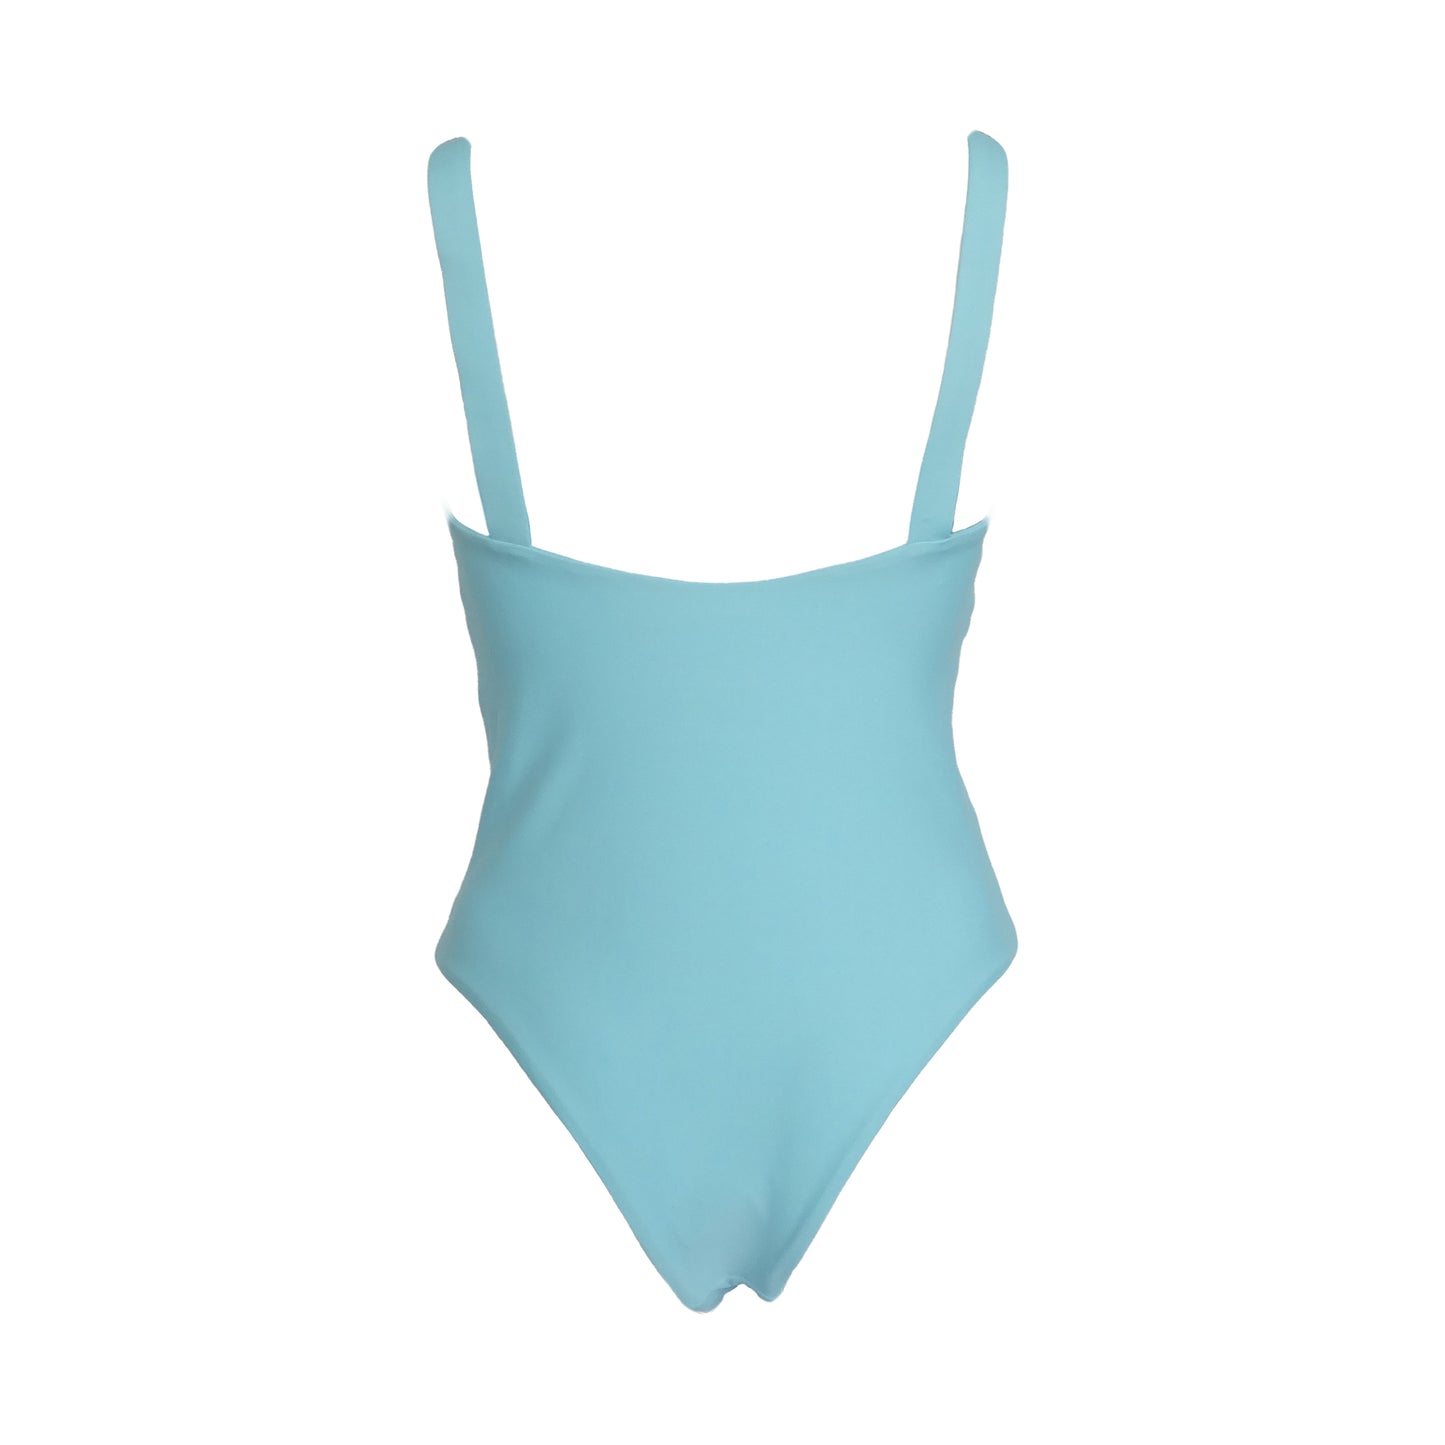 Back view of ocean blue straight square neck one piece swimsuit with adjustable gold belt buckle shoulder straps, high cut legs and cheeky bum coverage. 